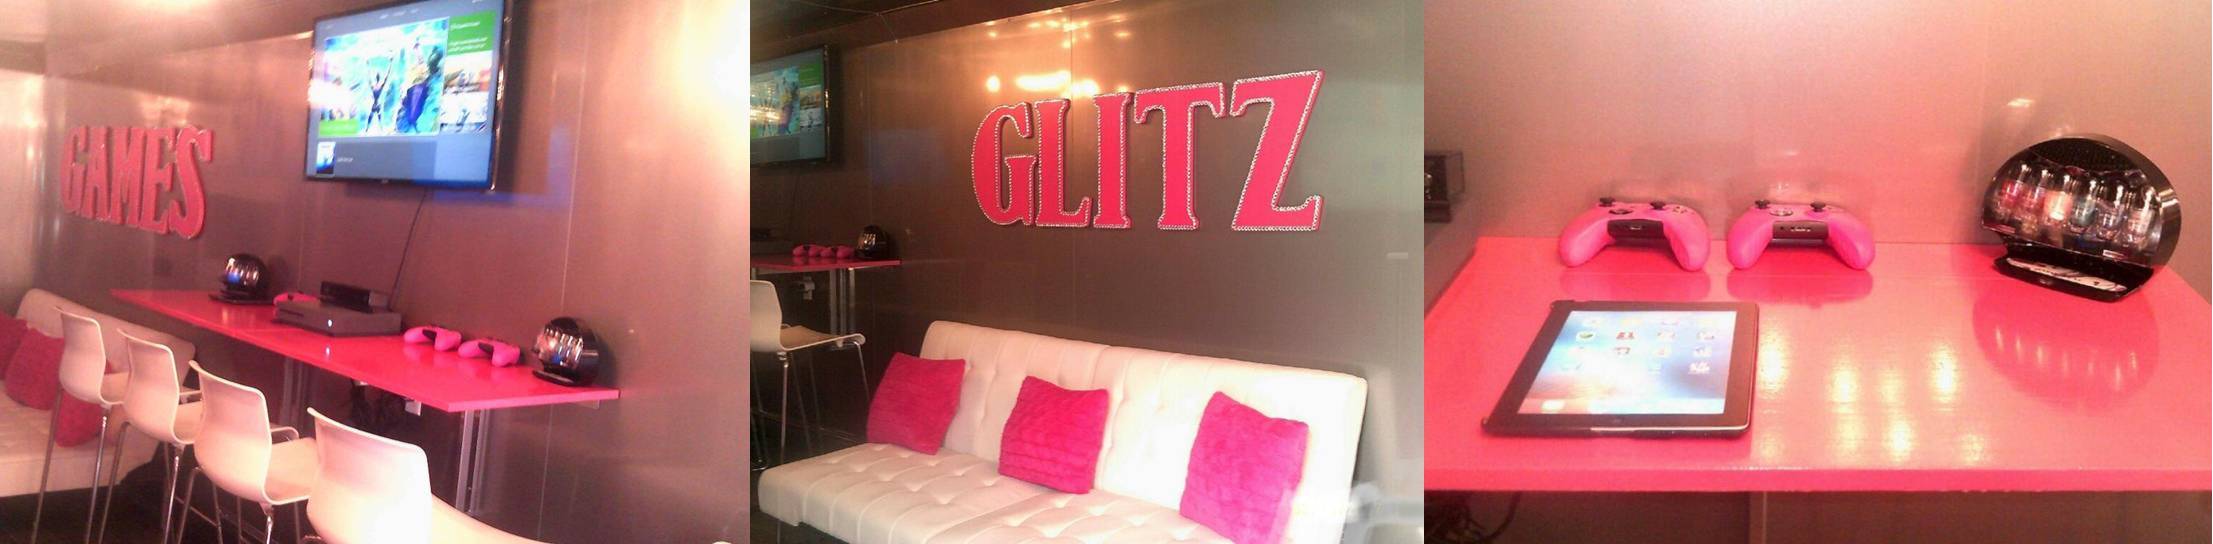 Chicago glamour glam glitz spa party truck for girls